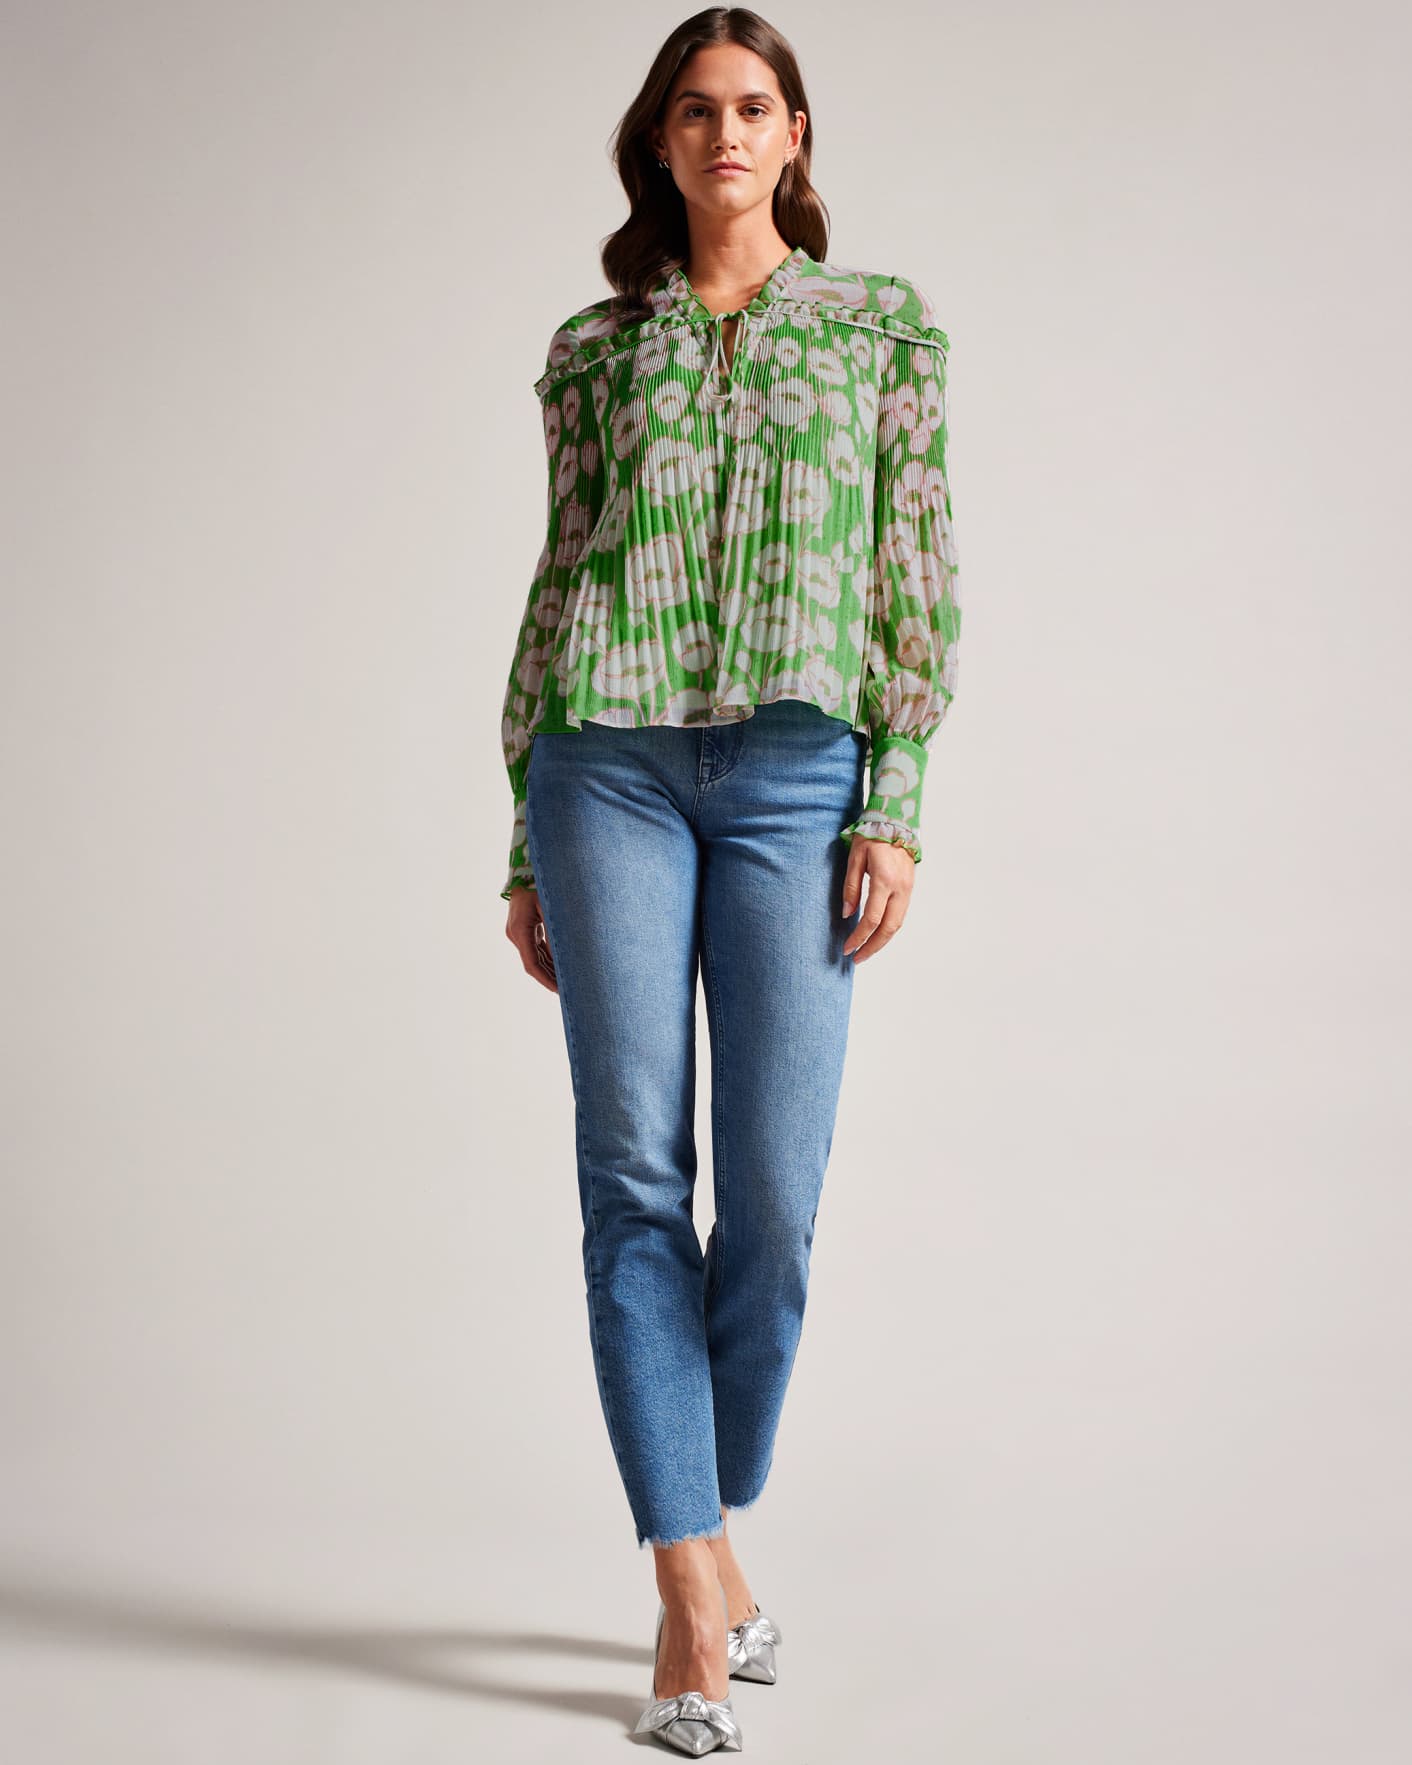 ELLERIE - GREEN | Tops & T-Shirts | Ted Baker ROW